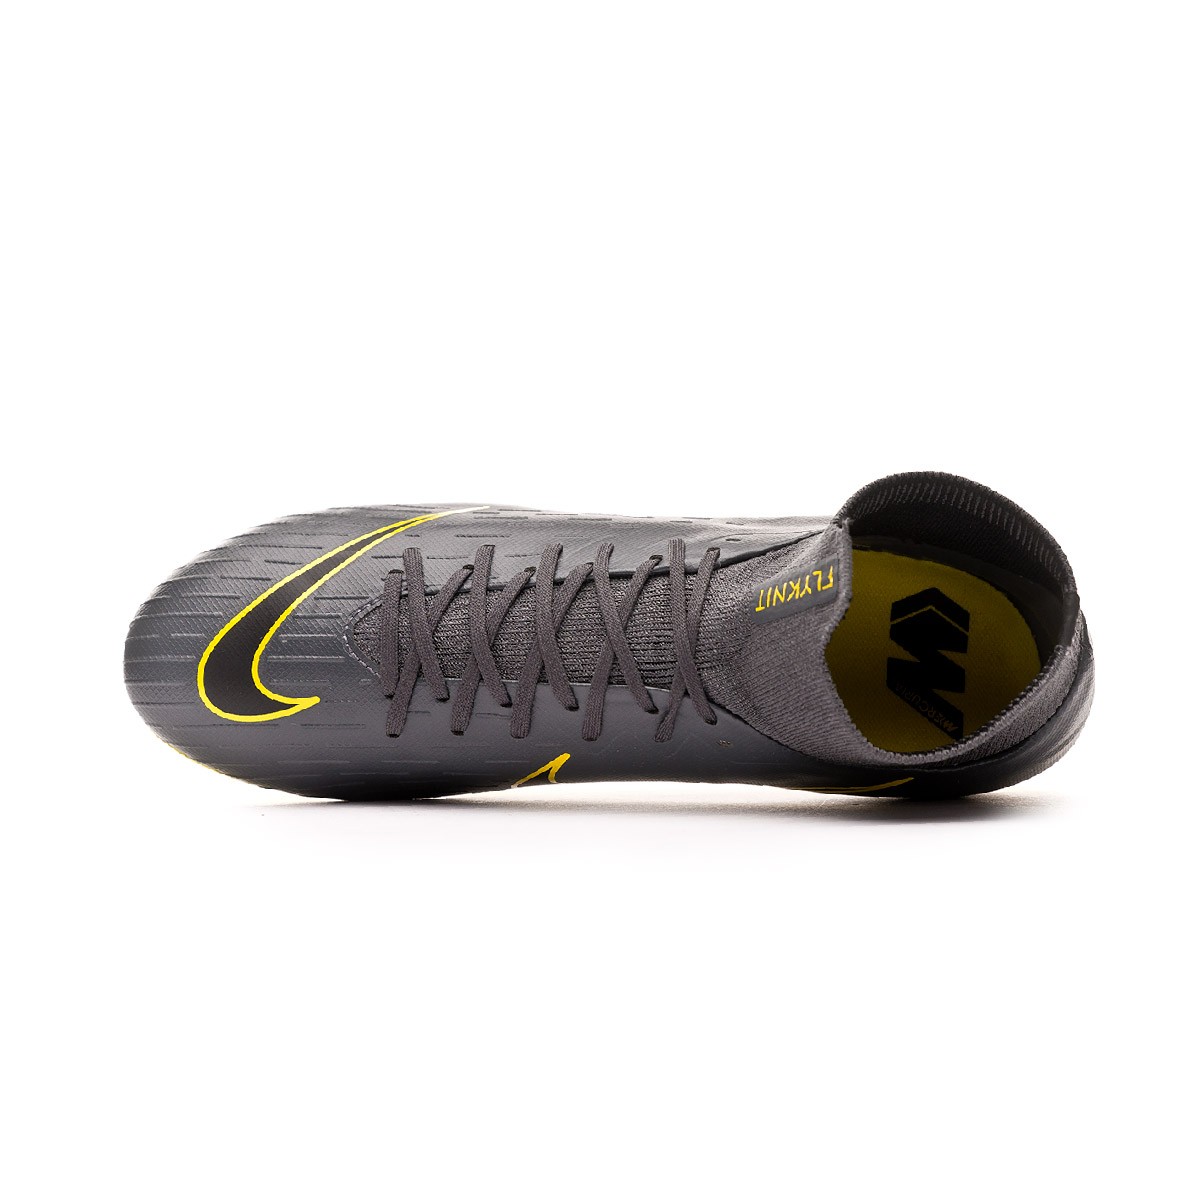 Nike Mercurial Superfly VI Pro Firm Ground Soccer Cleats.